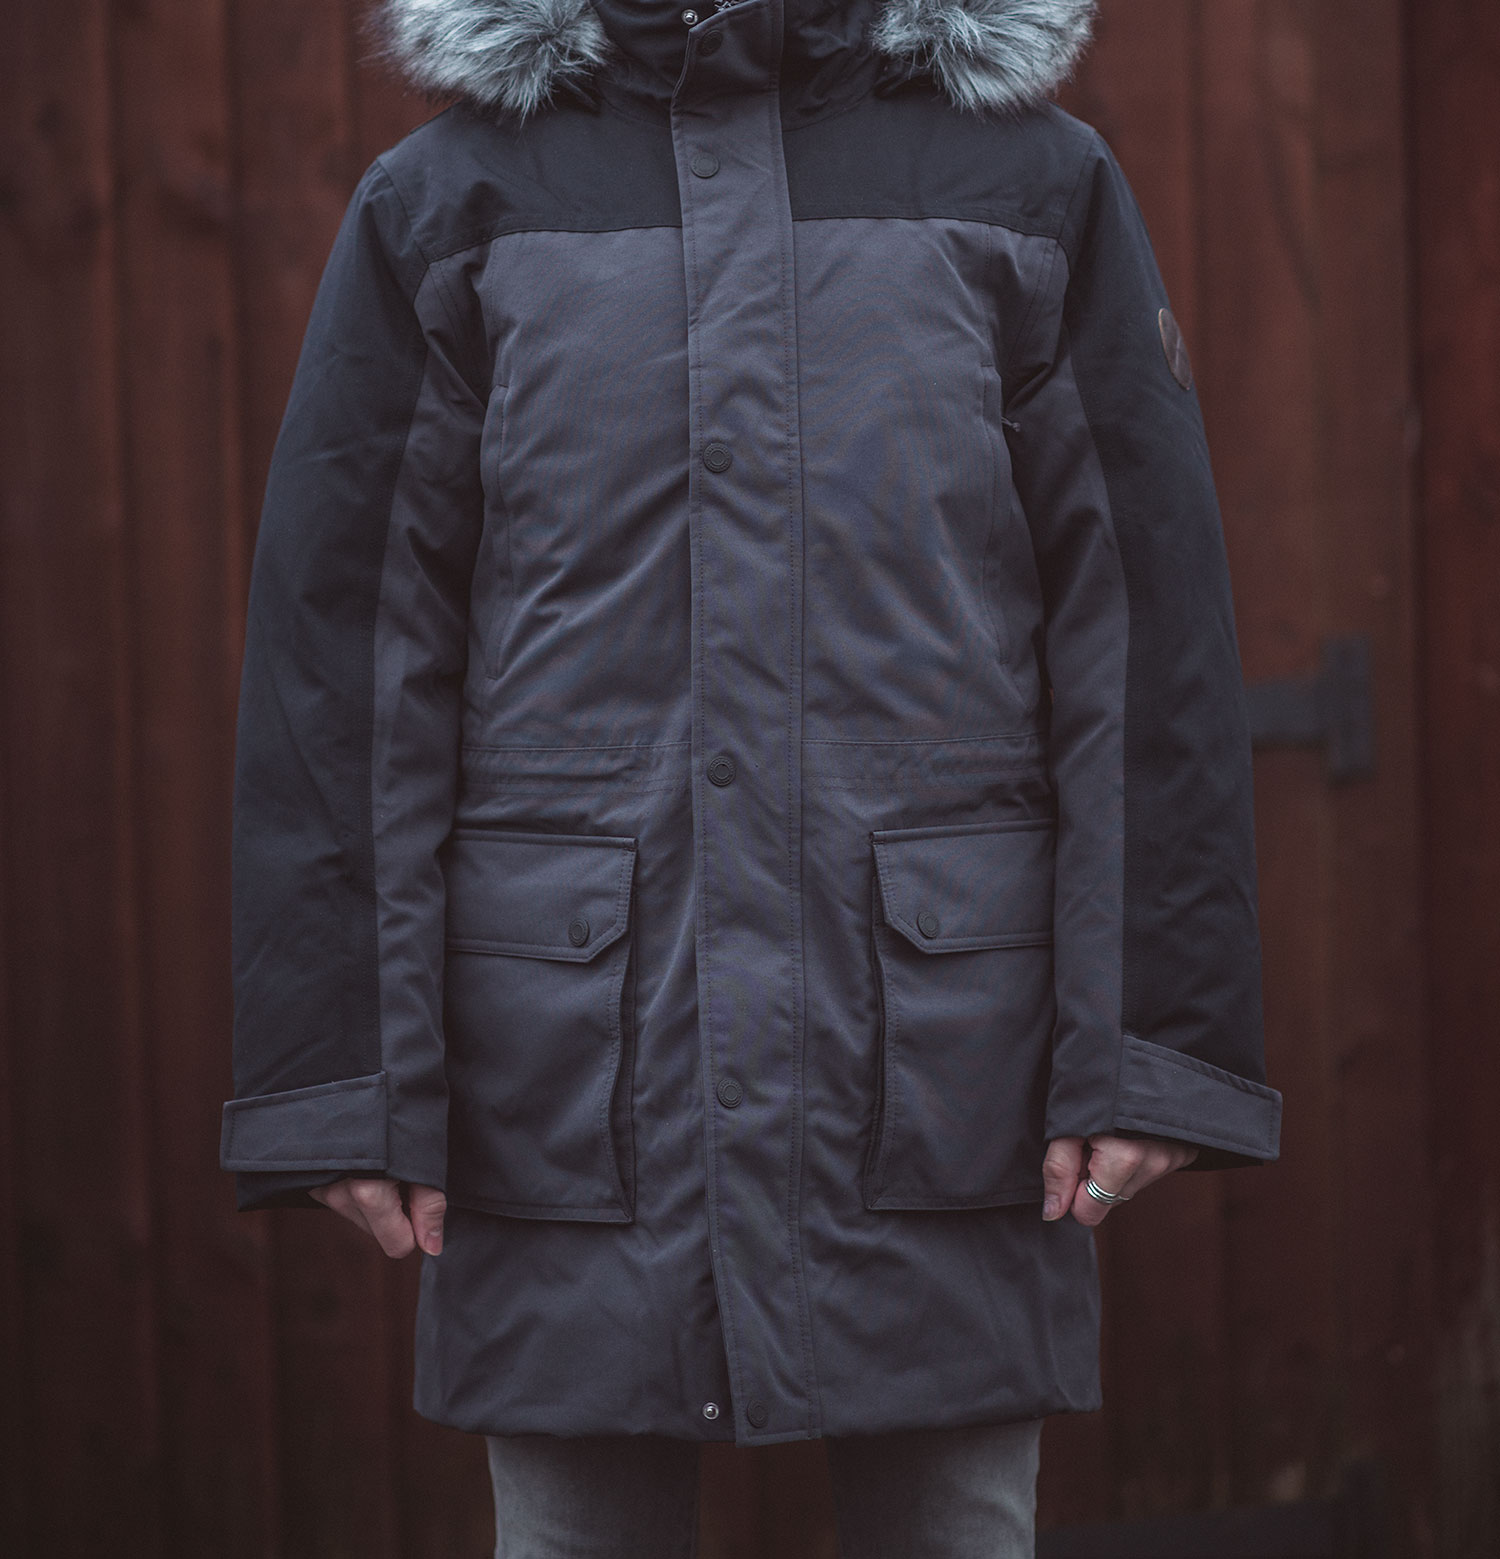 Land’s End Winter Coat Review - Your Average Guy